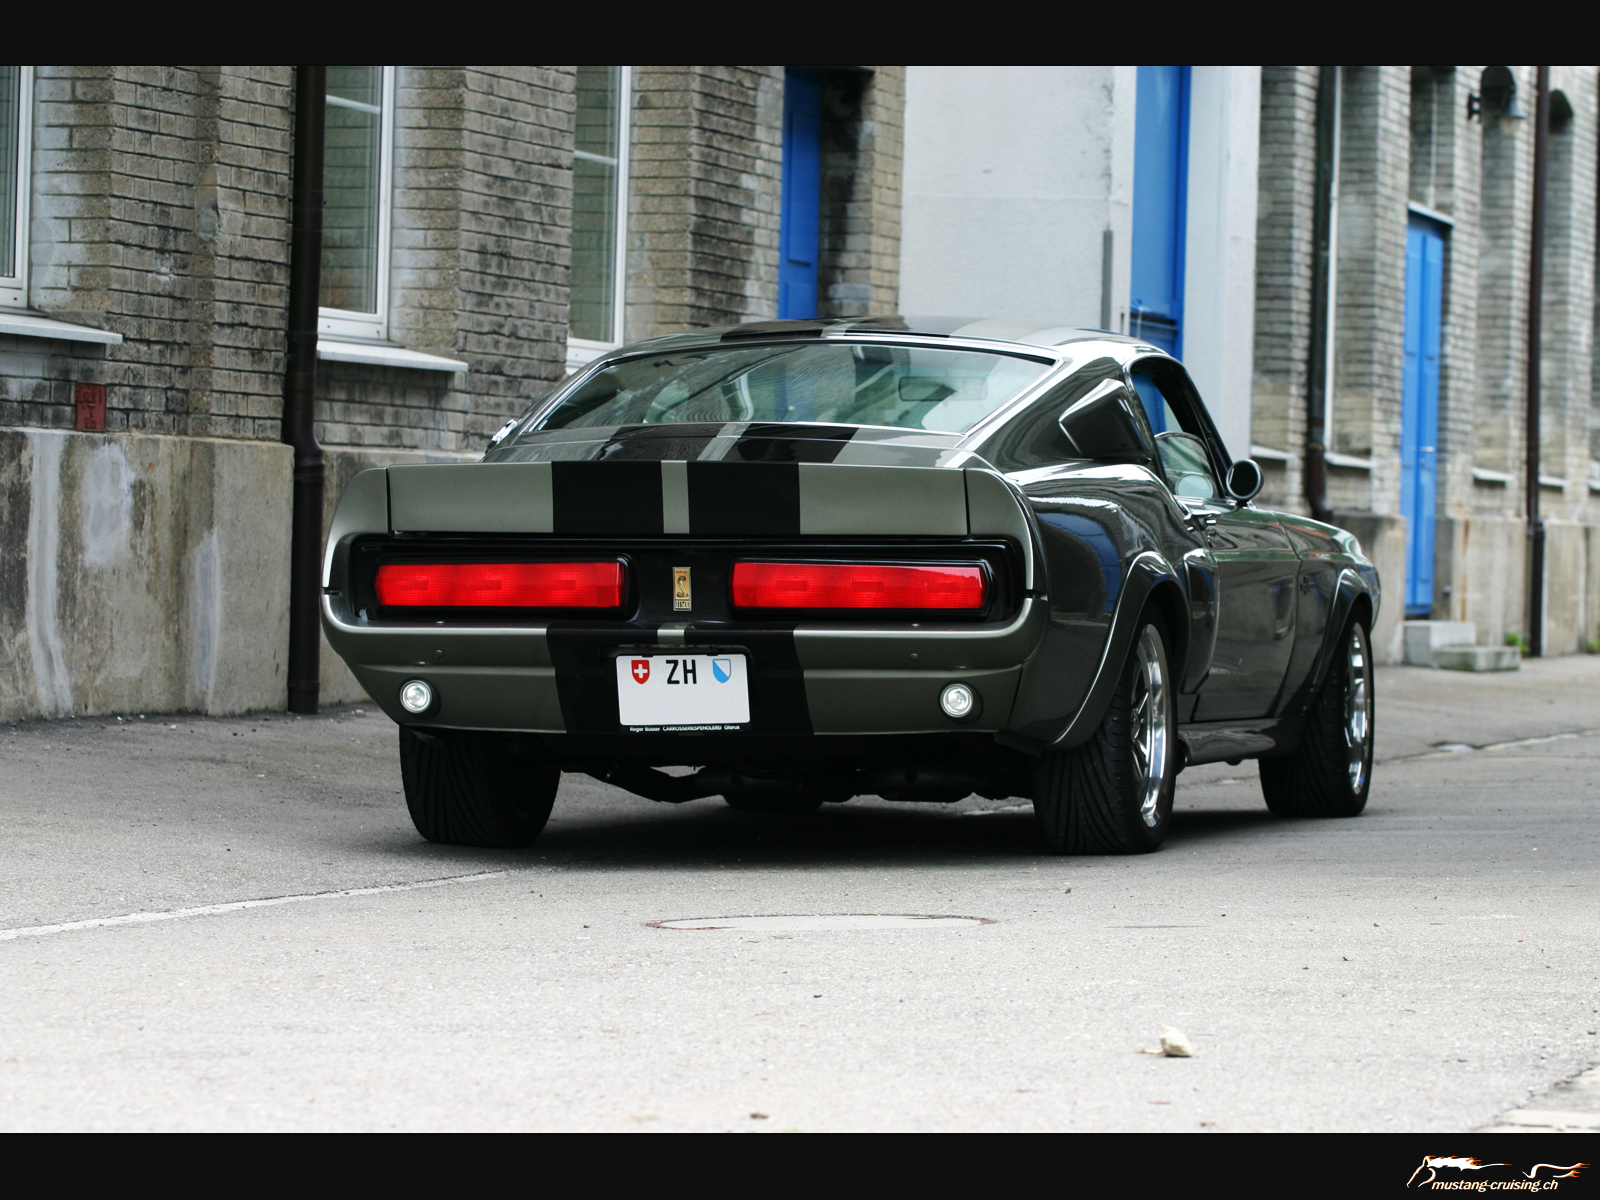 Classic  Wallpaper on Cars Muscle Ford Mustang Shelby Gt500 Classic Car Hd Wallpaper Of Cars